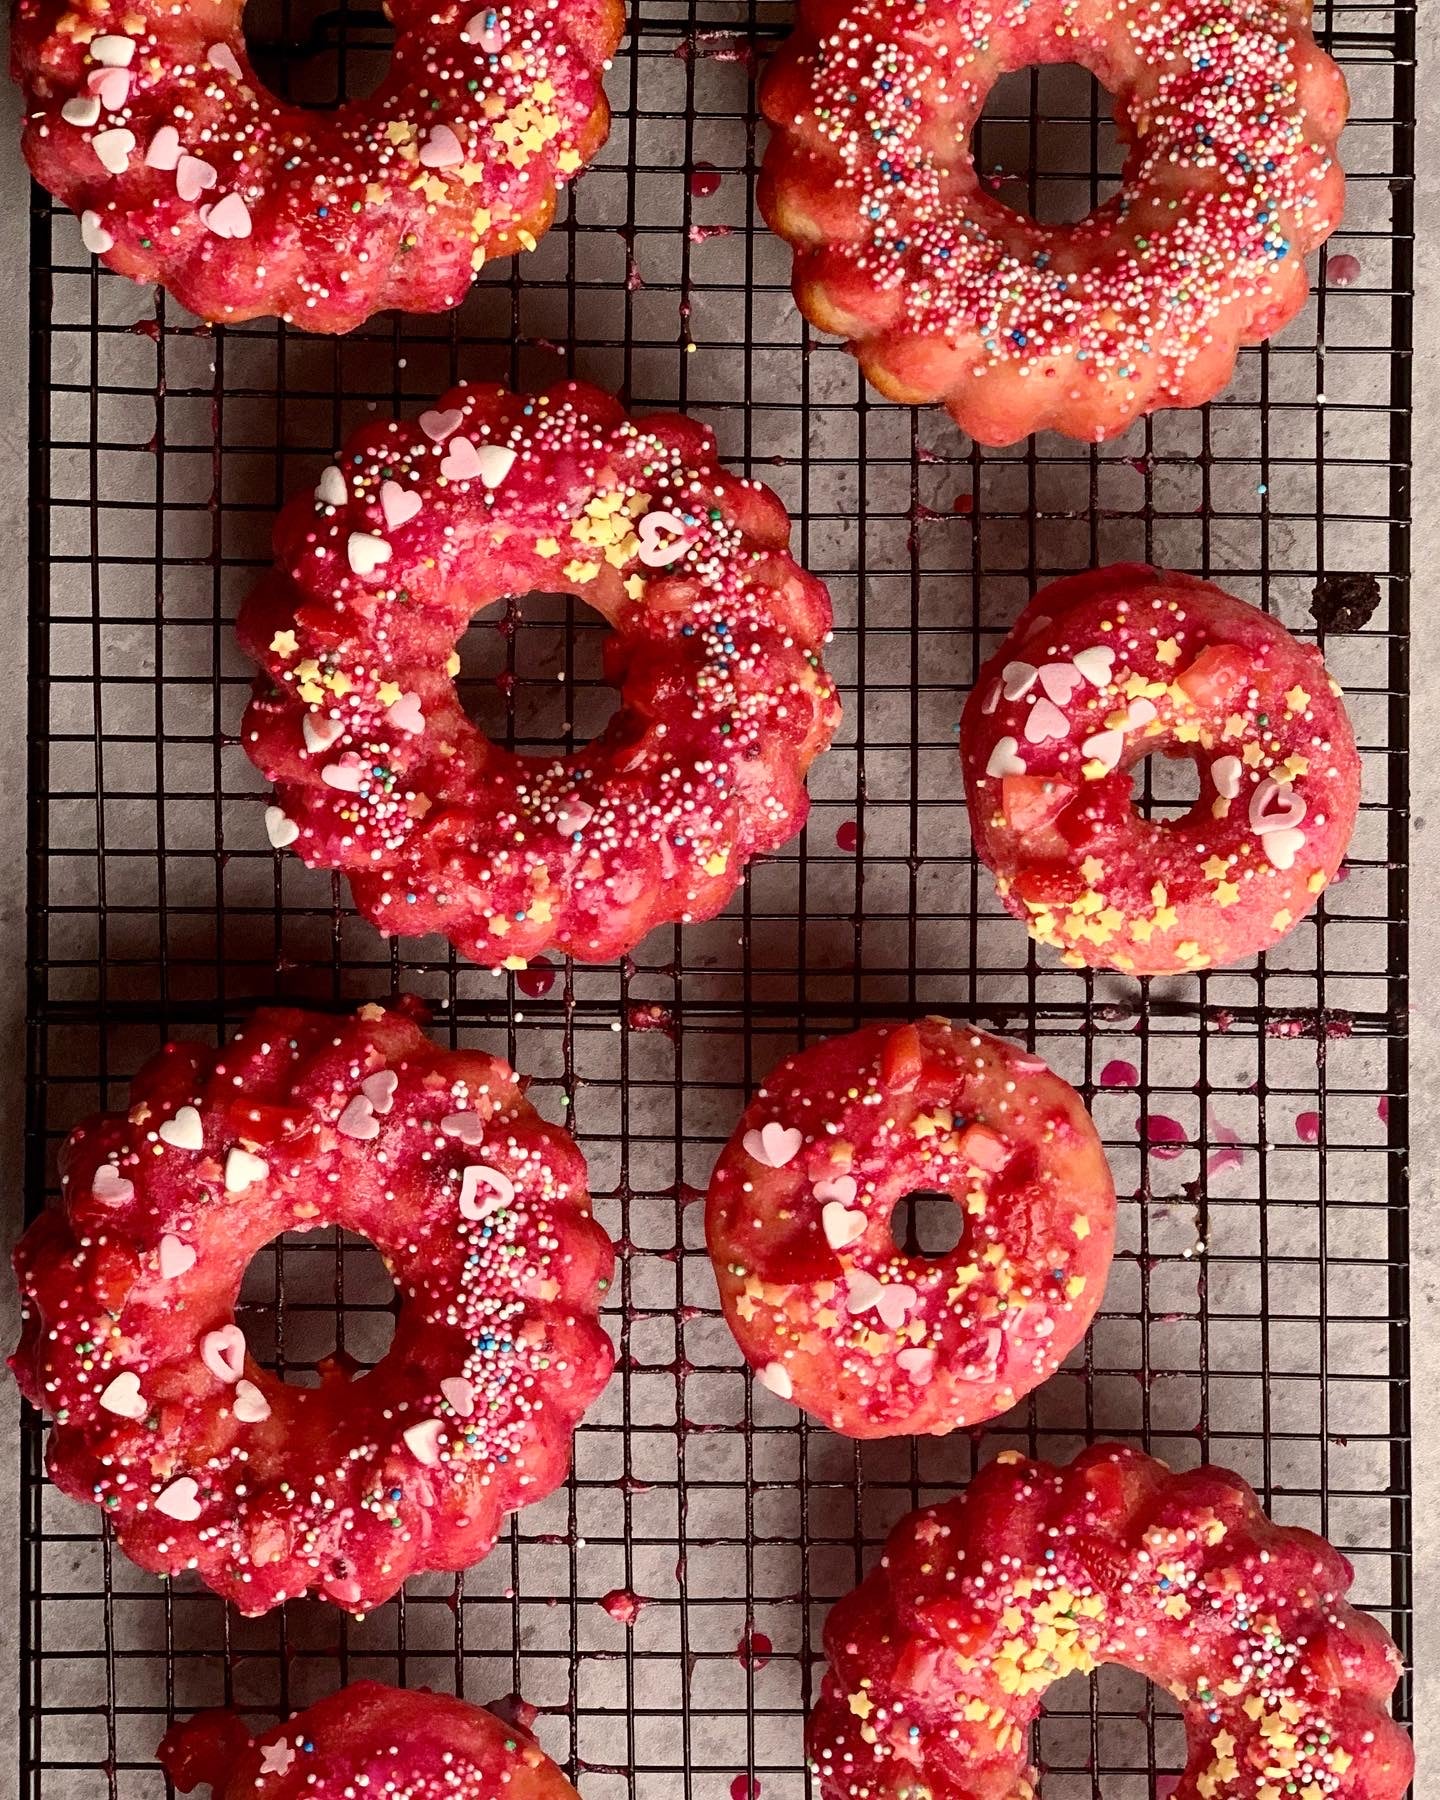 Low calorie/High Protein Raspberry Donuts